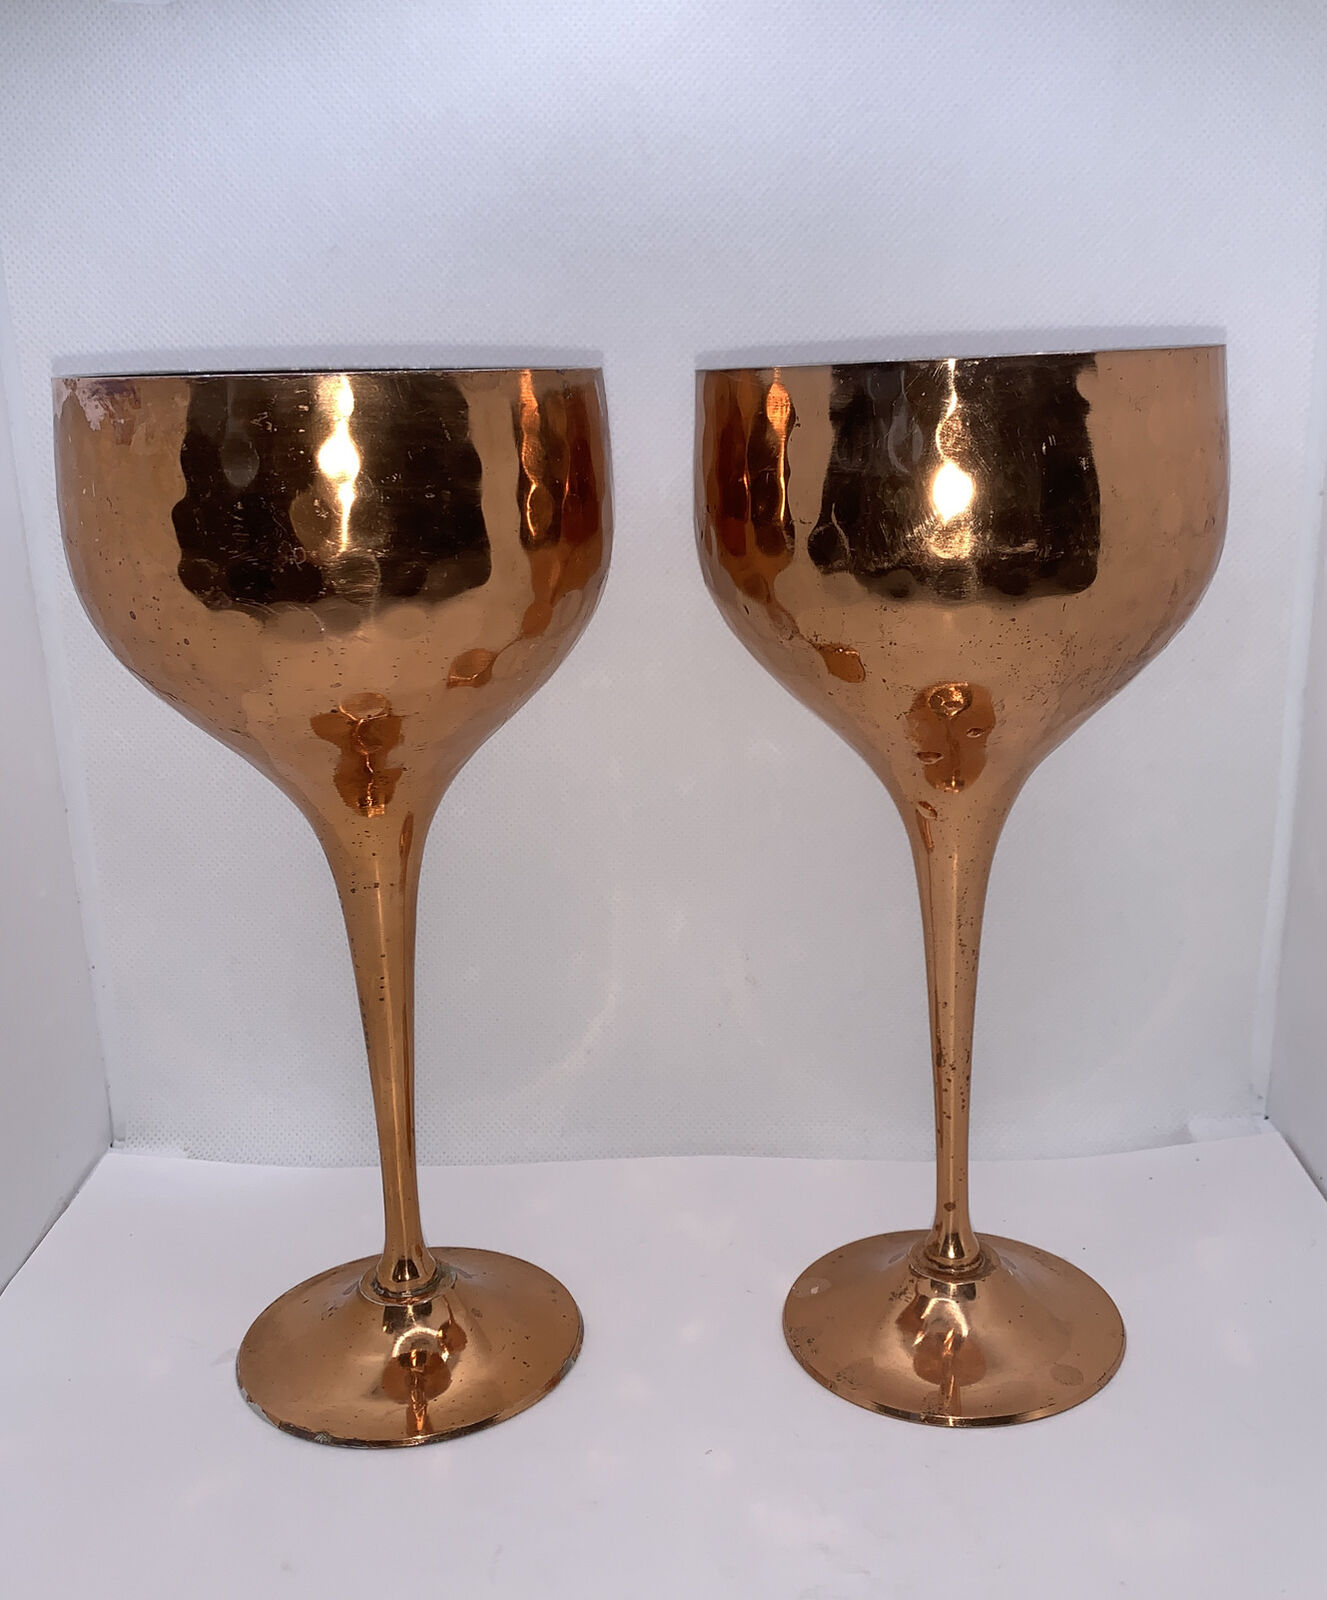 Hammered Goblet Copper Plated Textured Crafted In India 13 Oz/.38 liters 8”/20cm